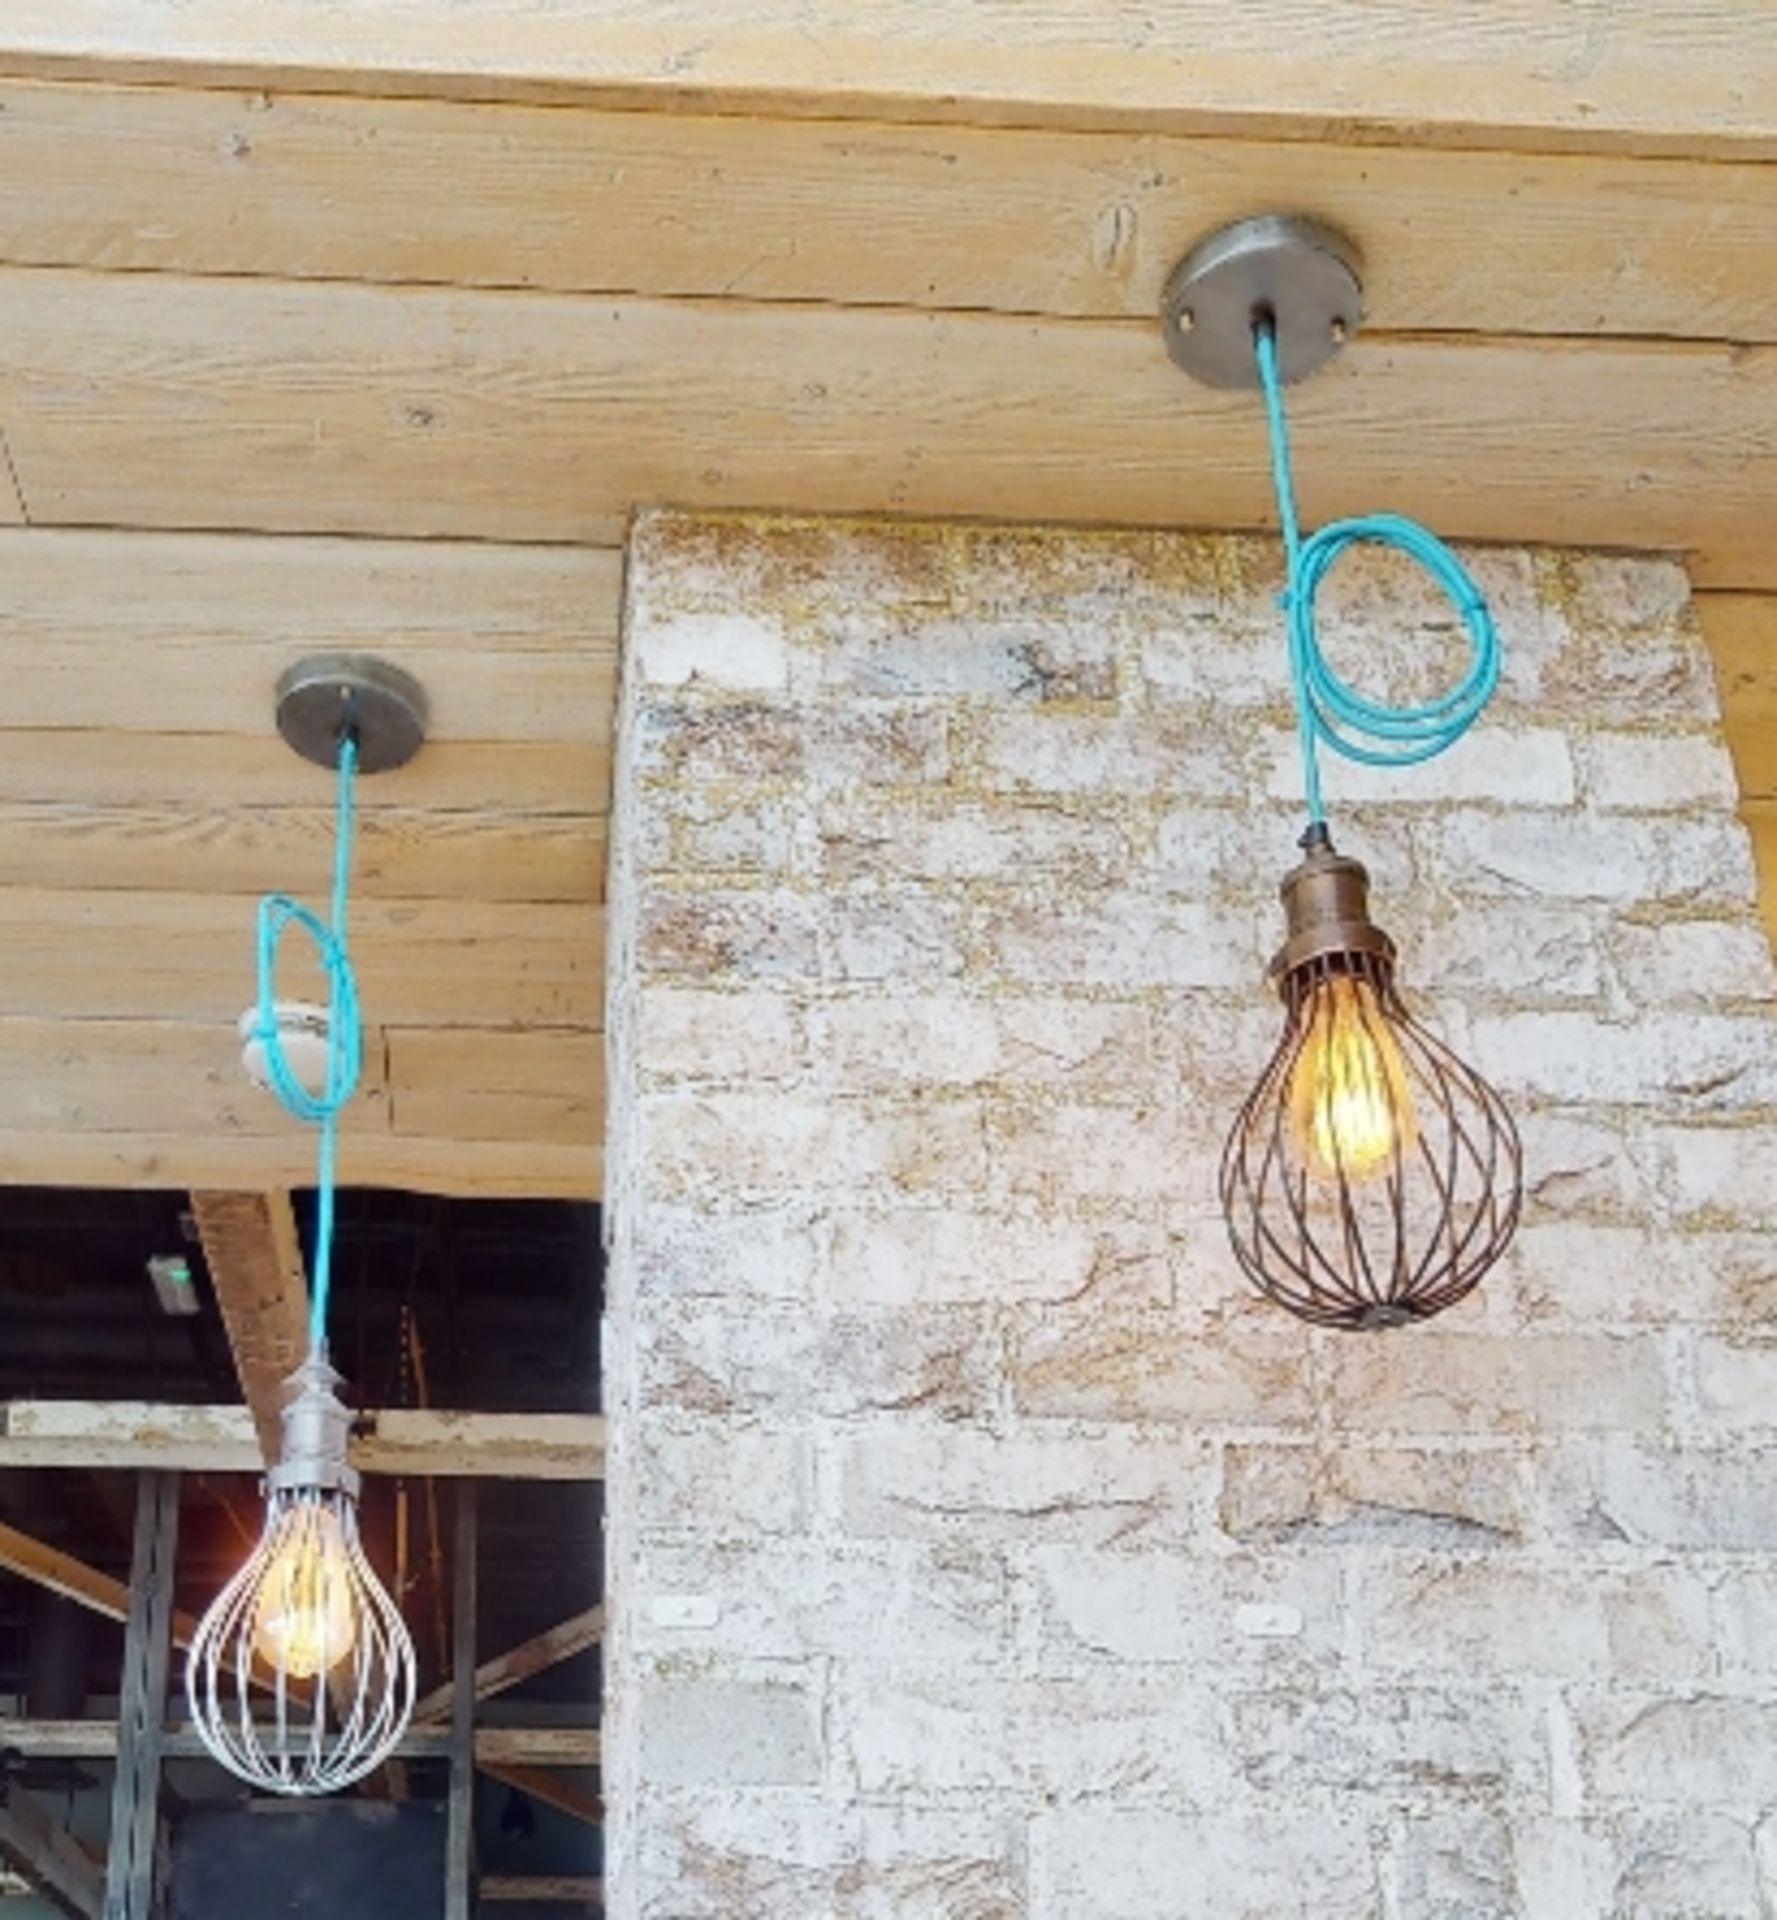 6 x Suspended Rope Lights With Blue Rope Cable, Antique Copper Cage Pendants and Ceiling Mounts - Image 4 of 7